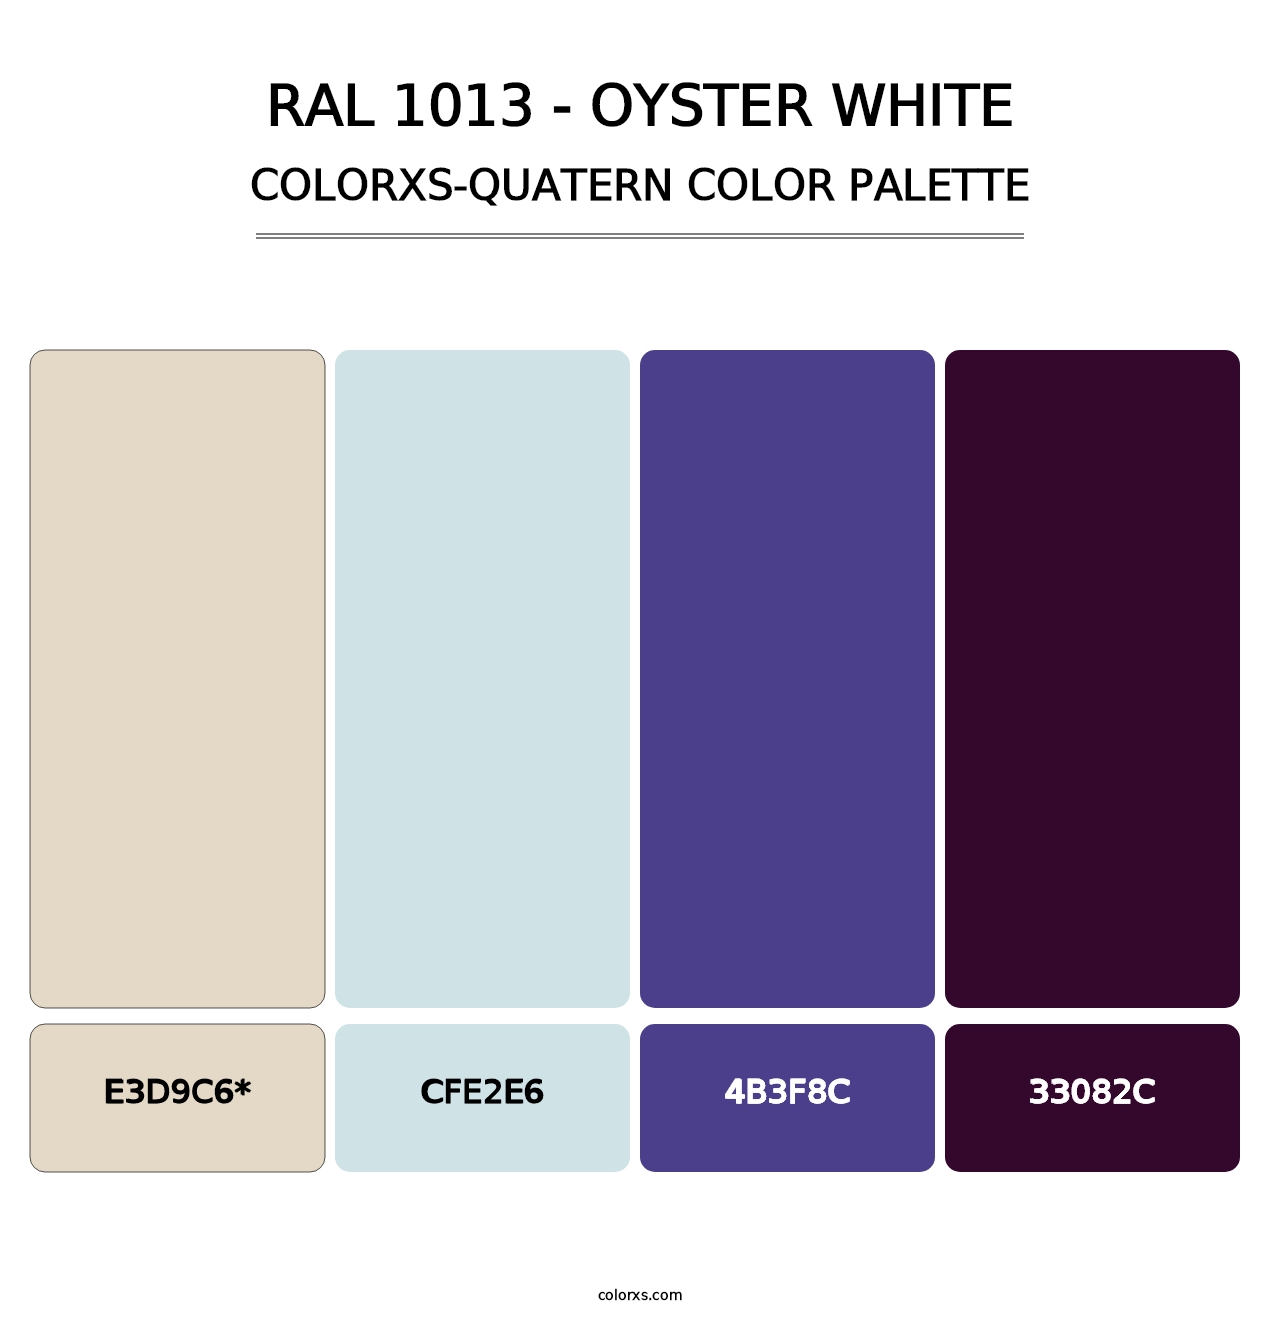 RAL 1013 - Oyster White - Colorxs Quatern Palette